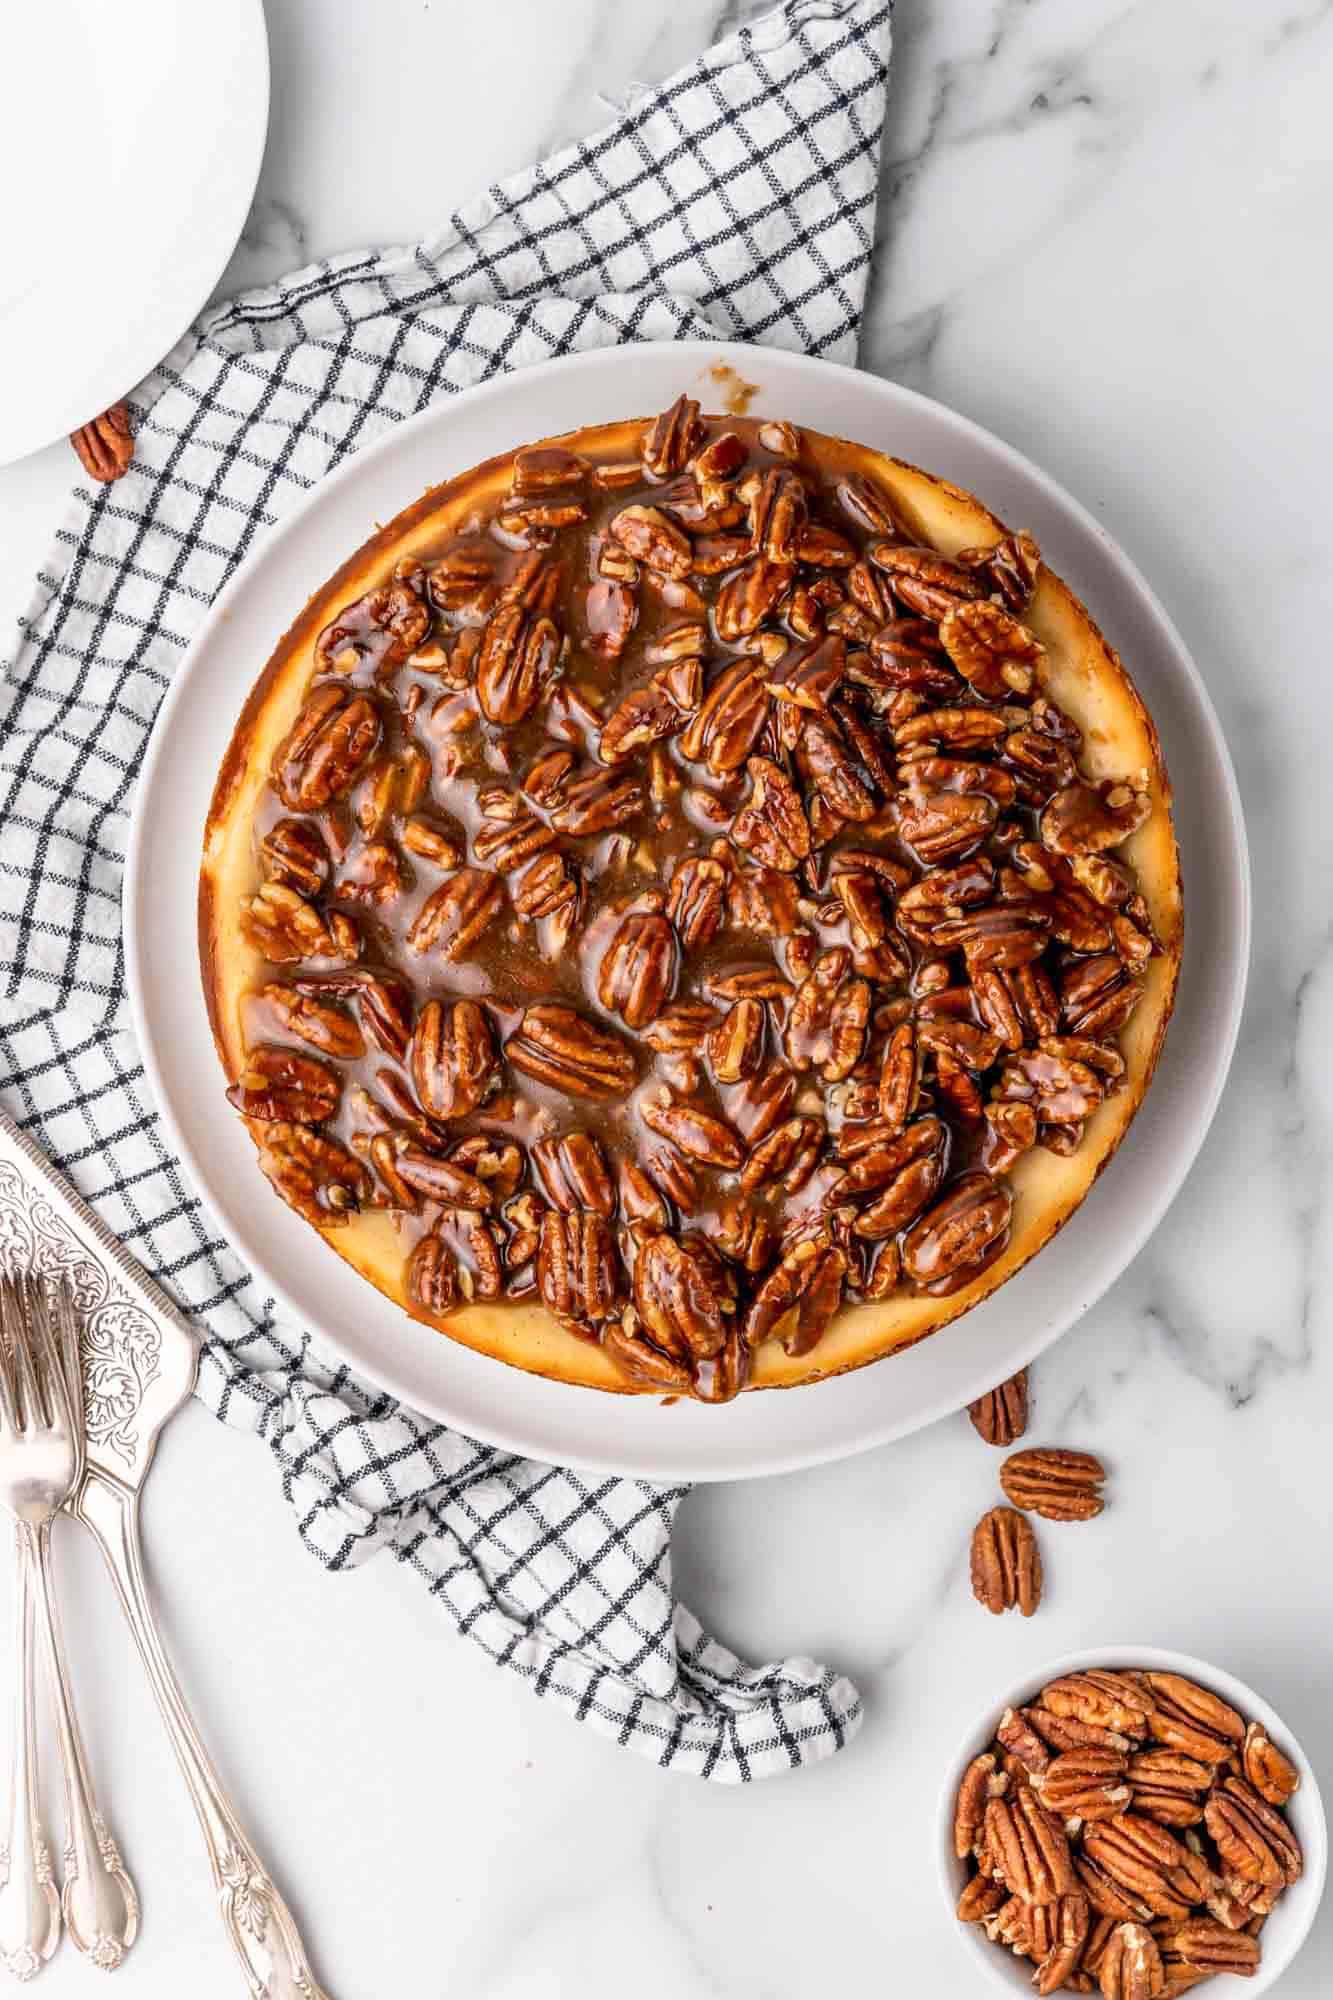 a pecan pie cheesecake on top of a blue and white checked towel, viewed from overhead